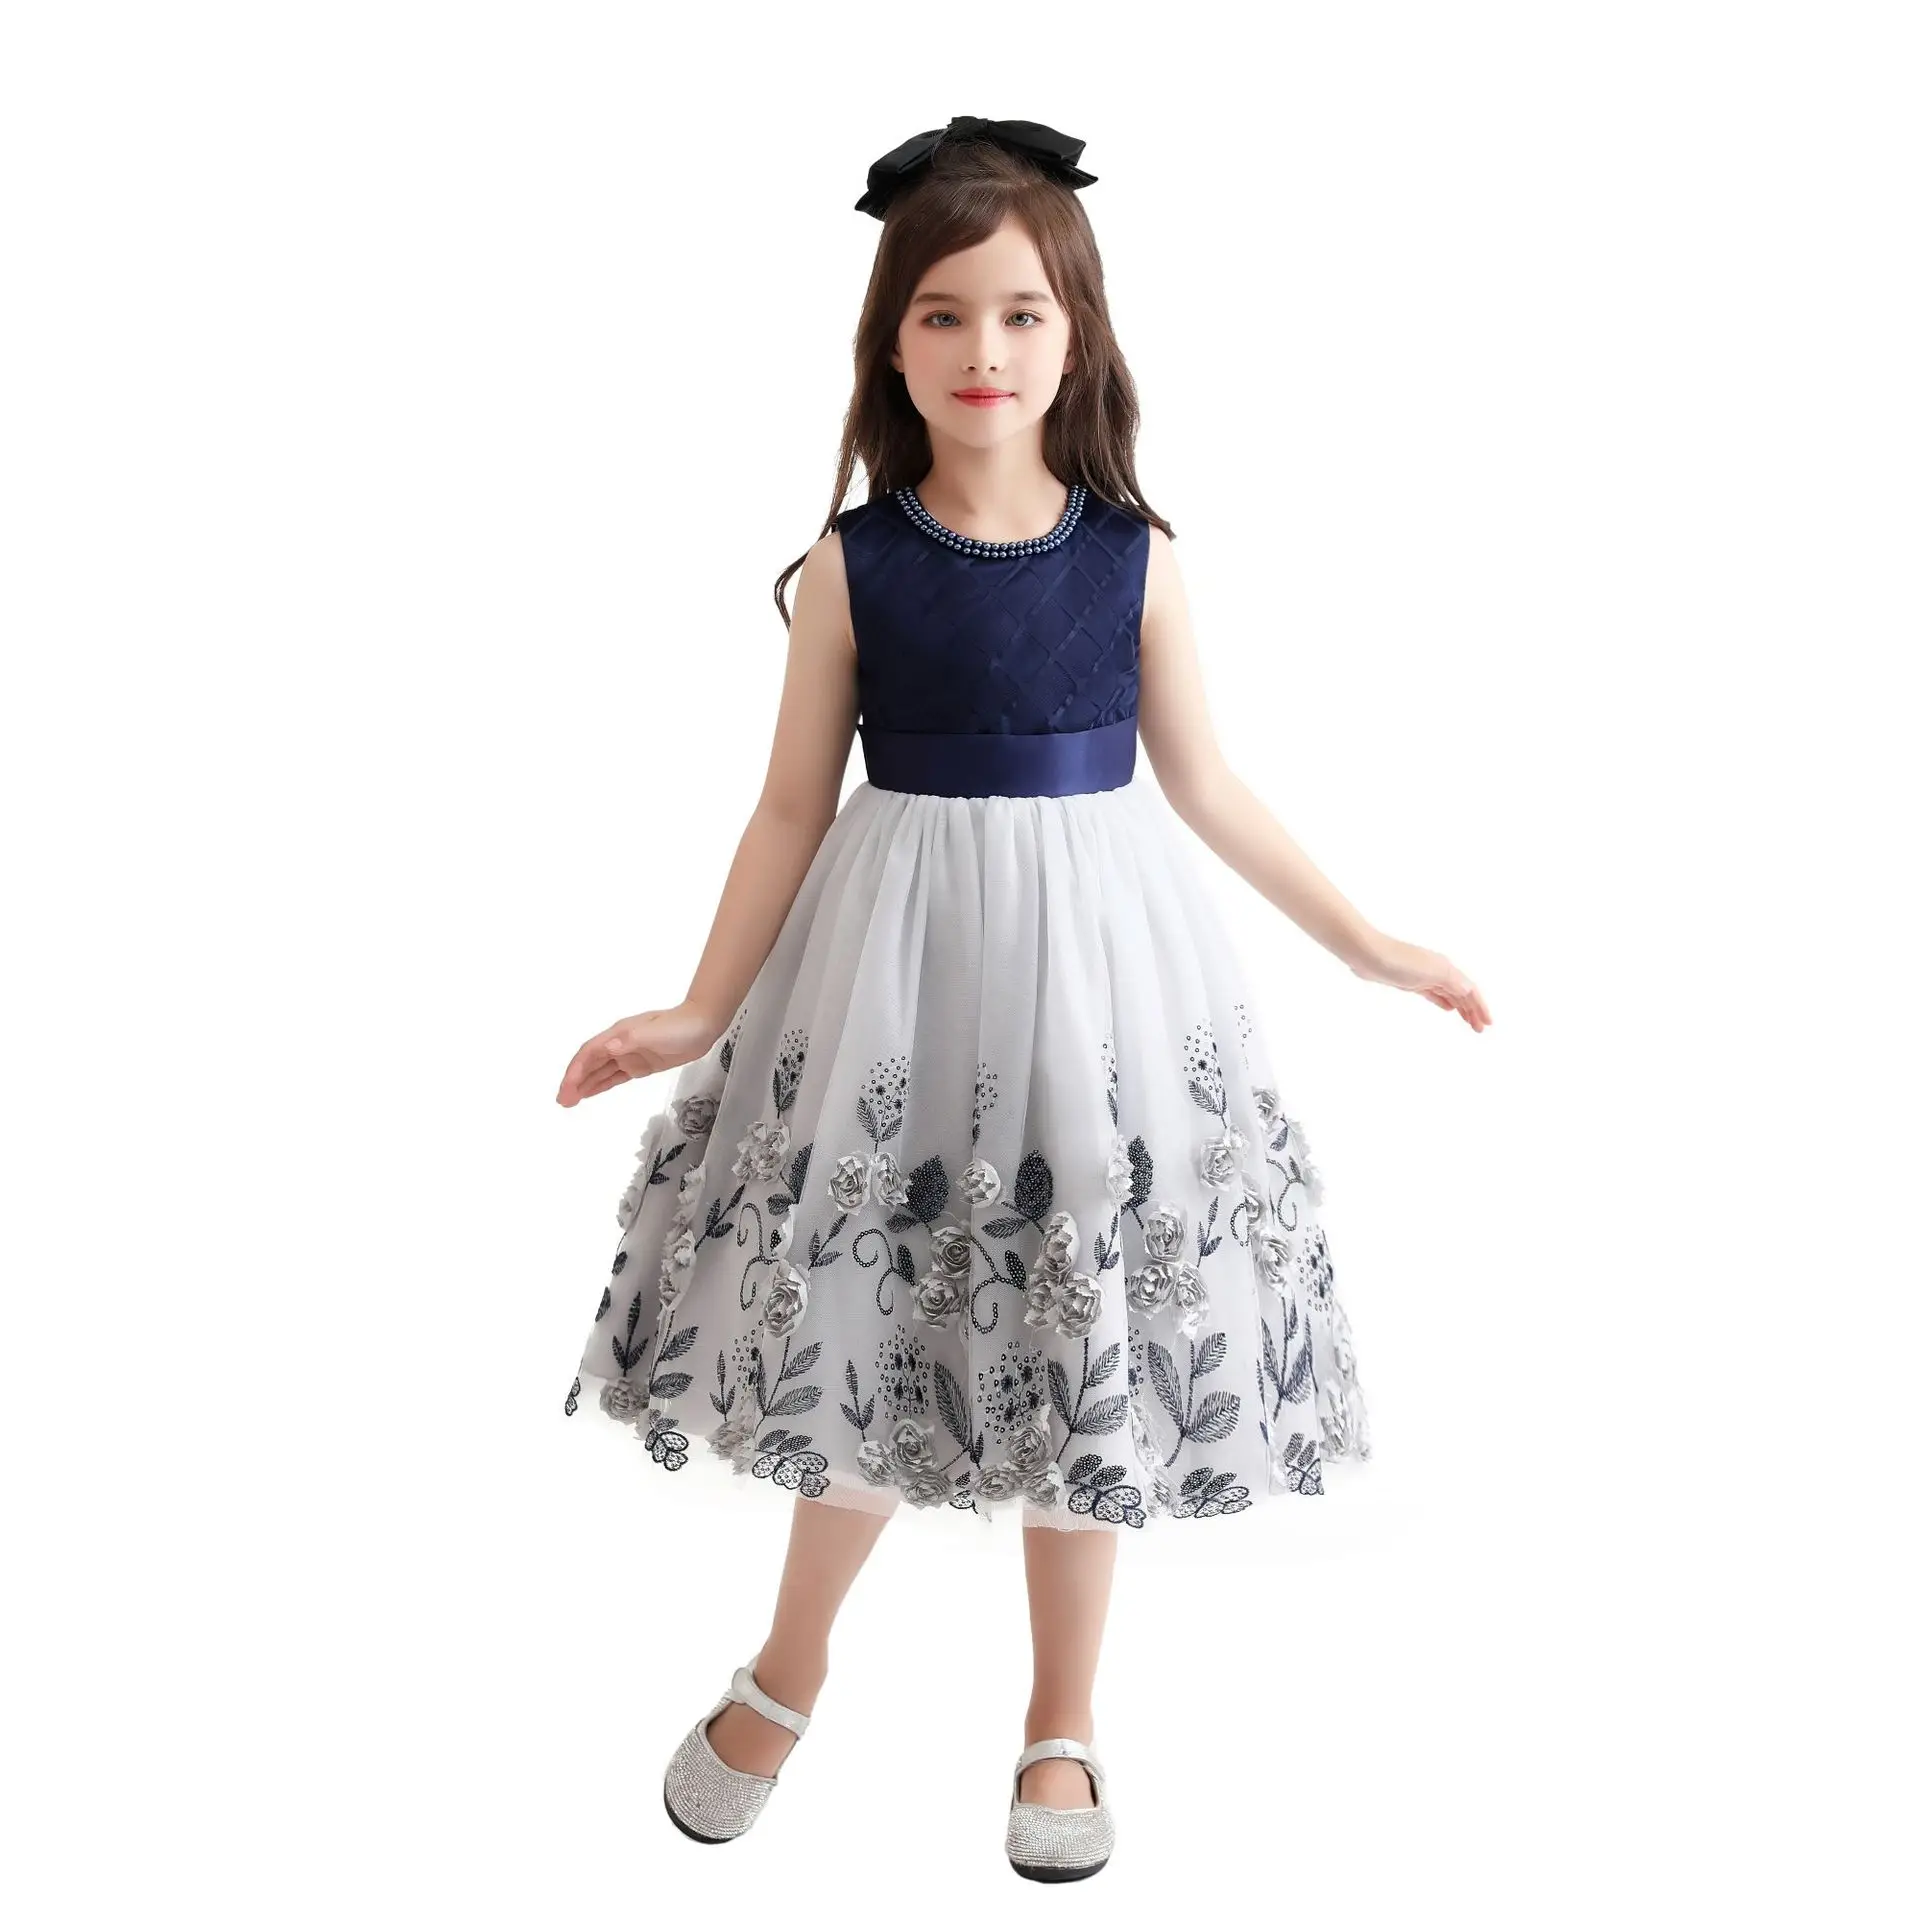 

Tulle Floral Petals Toddler Flower Girl Dresses Bridal Gown Wedding Bridesmaid Pageant Party Formal Long Gown Princess Dress